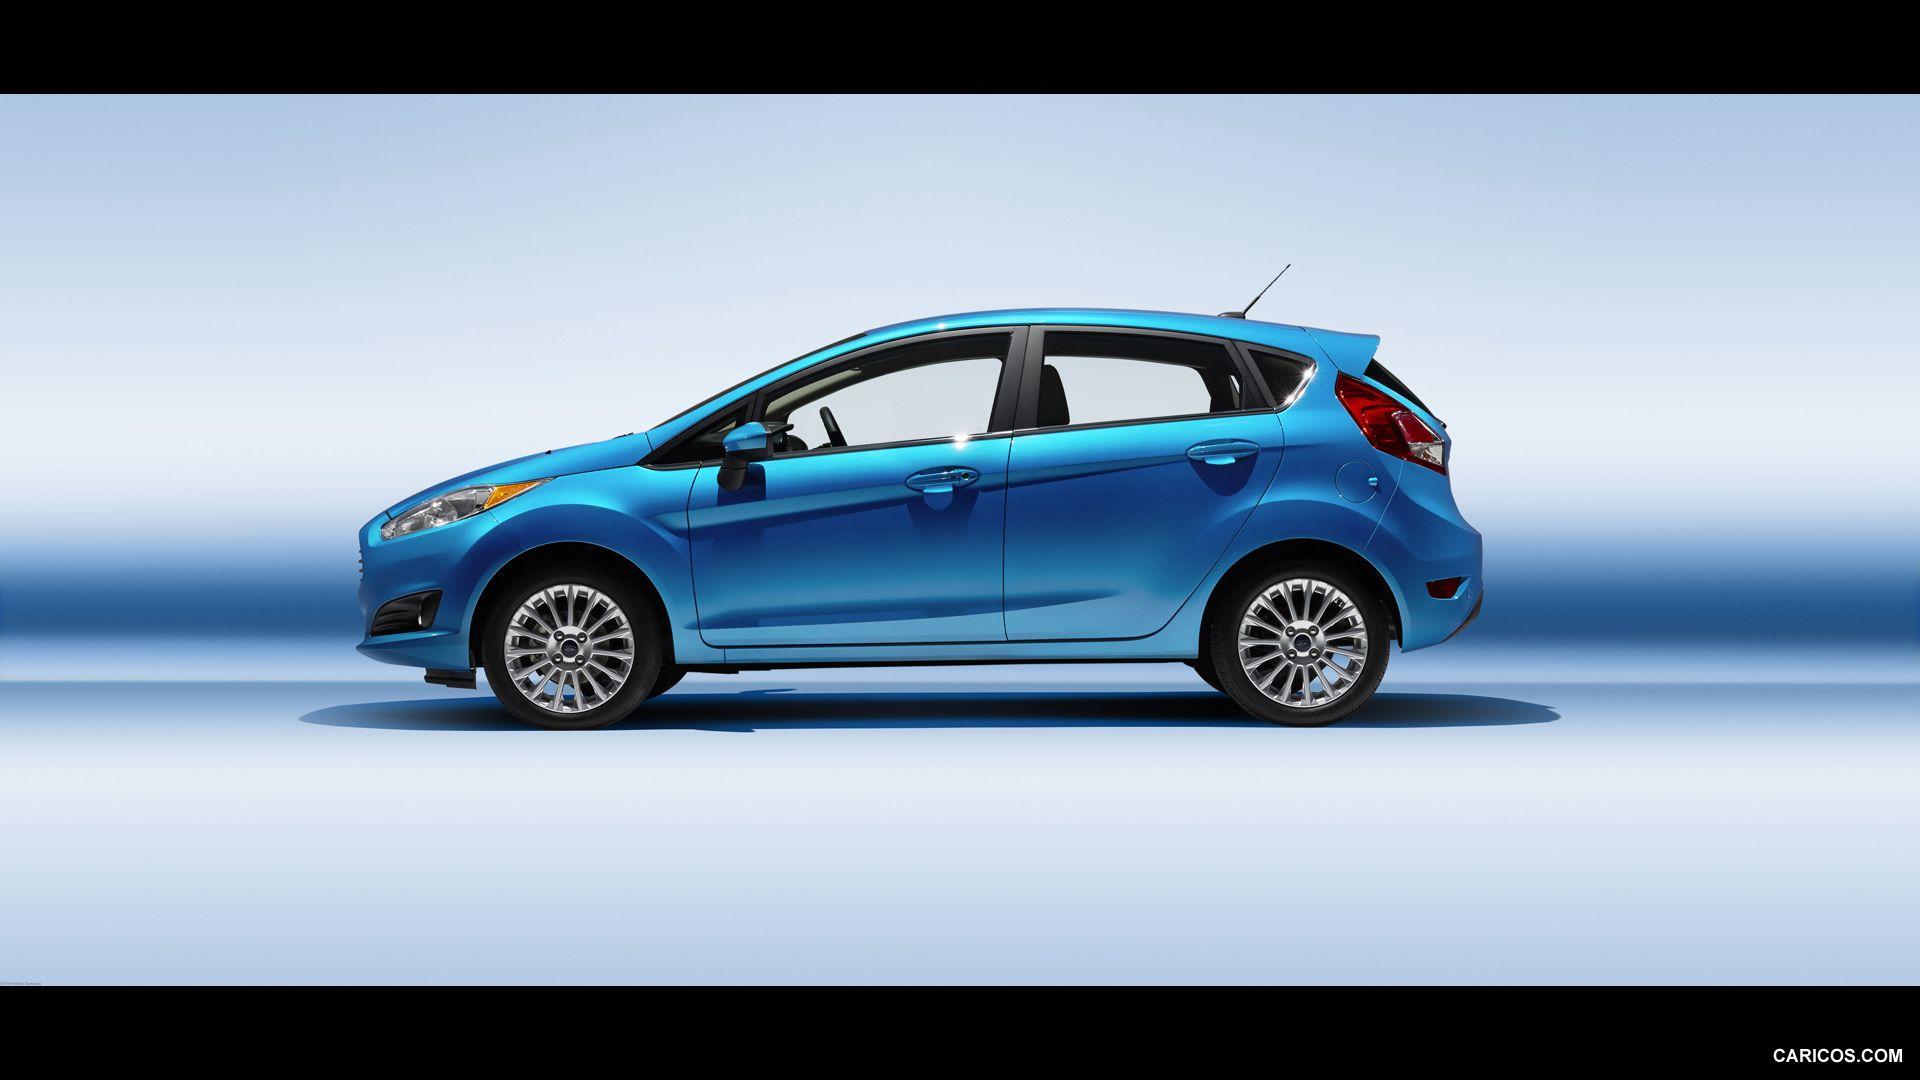 Top Collection of Ford Fiesta Wallpaper, Ford Fiesta Wallpaper